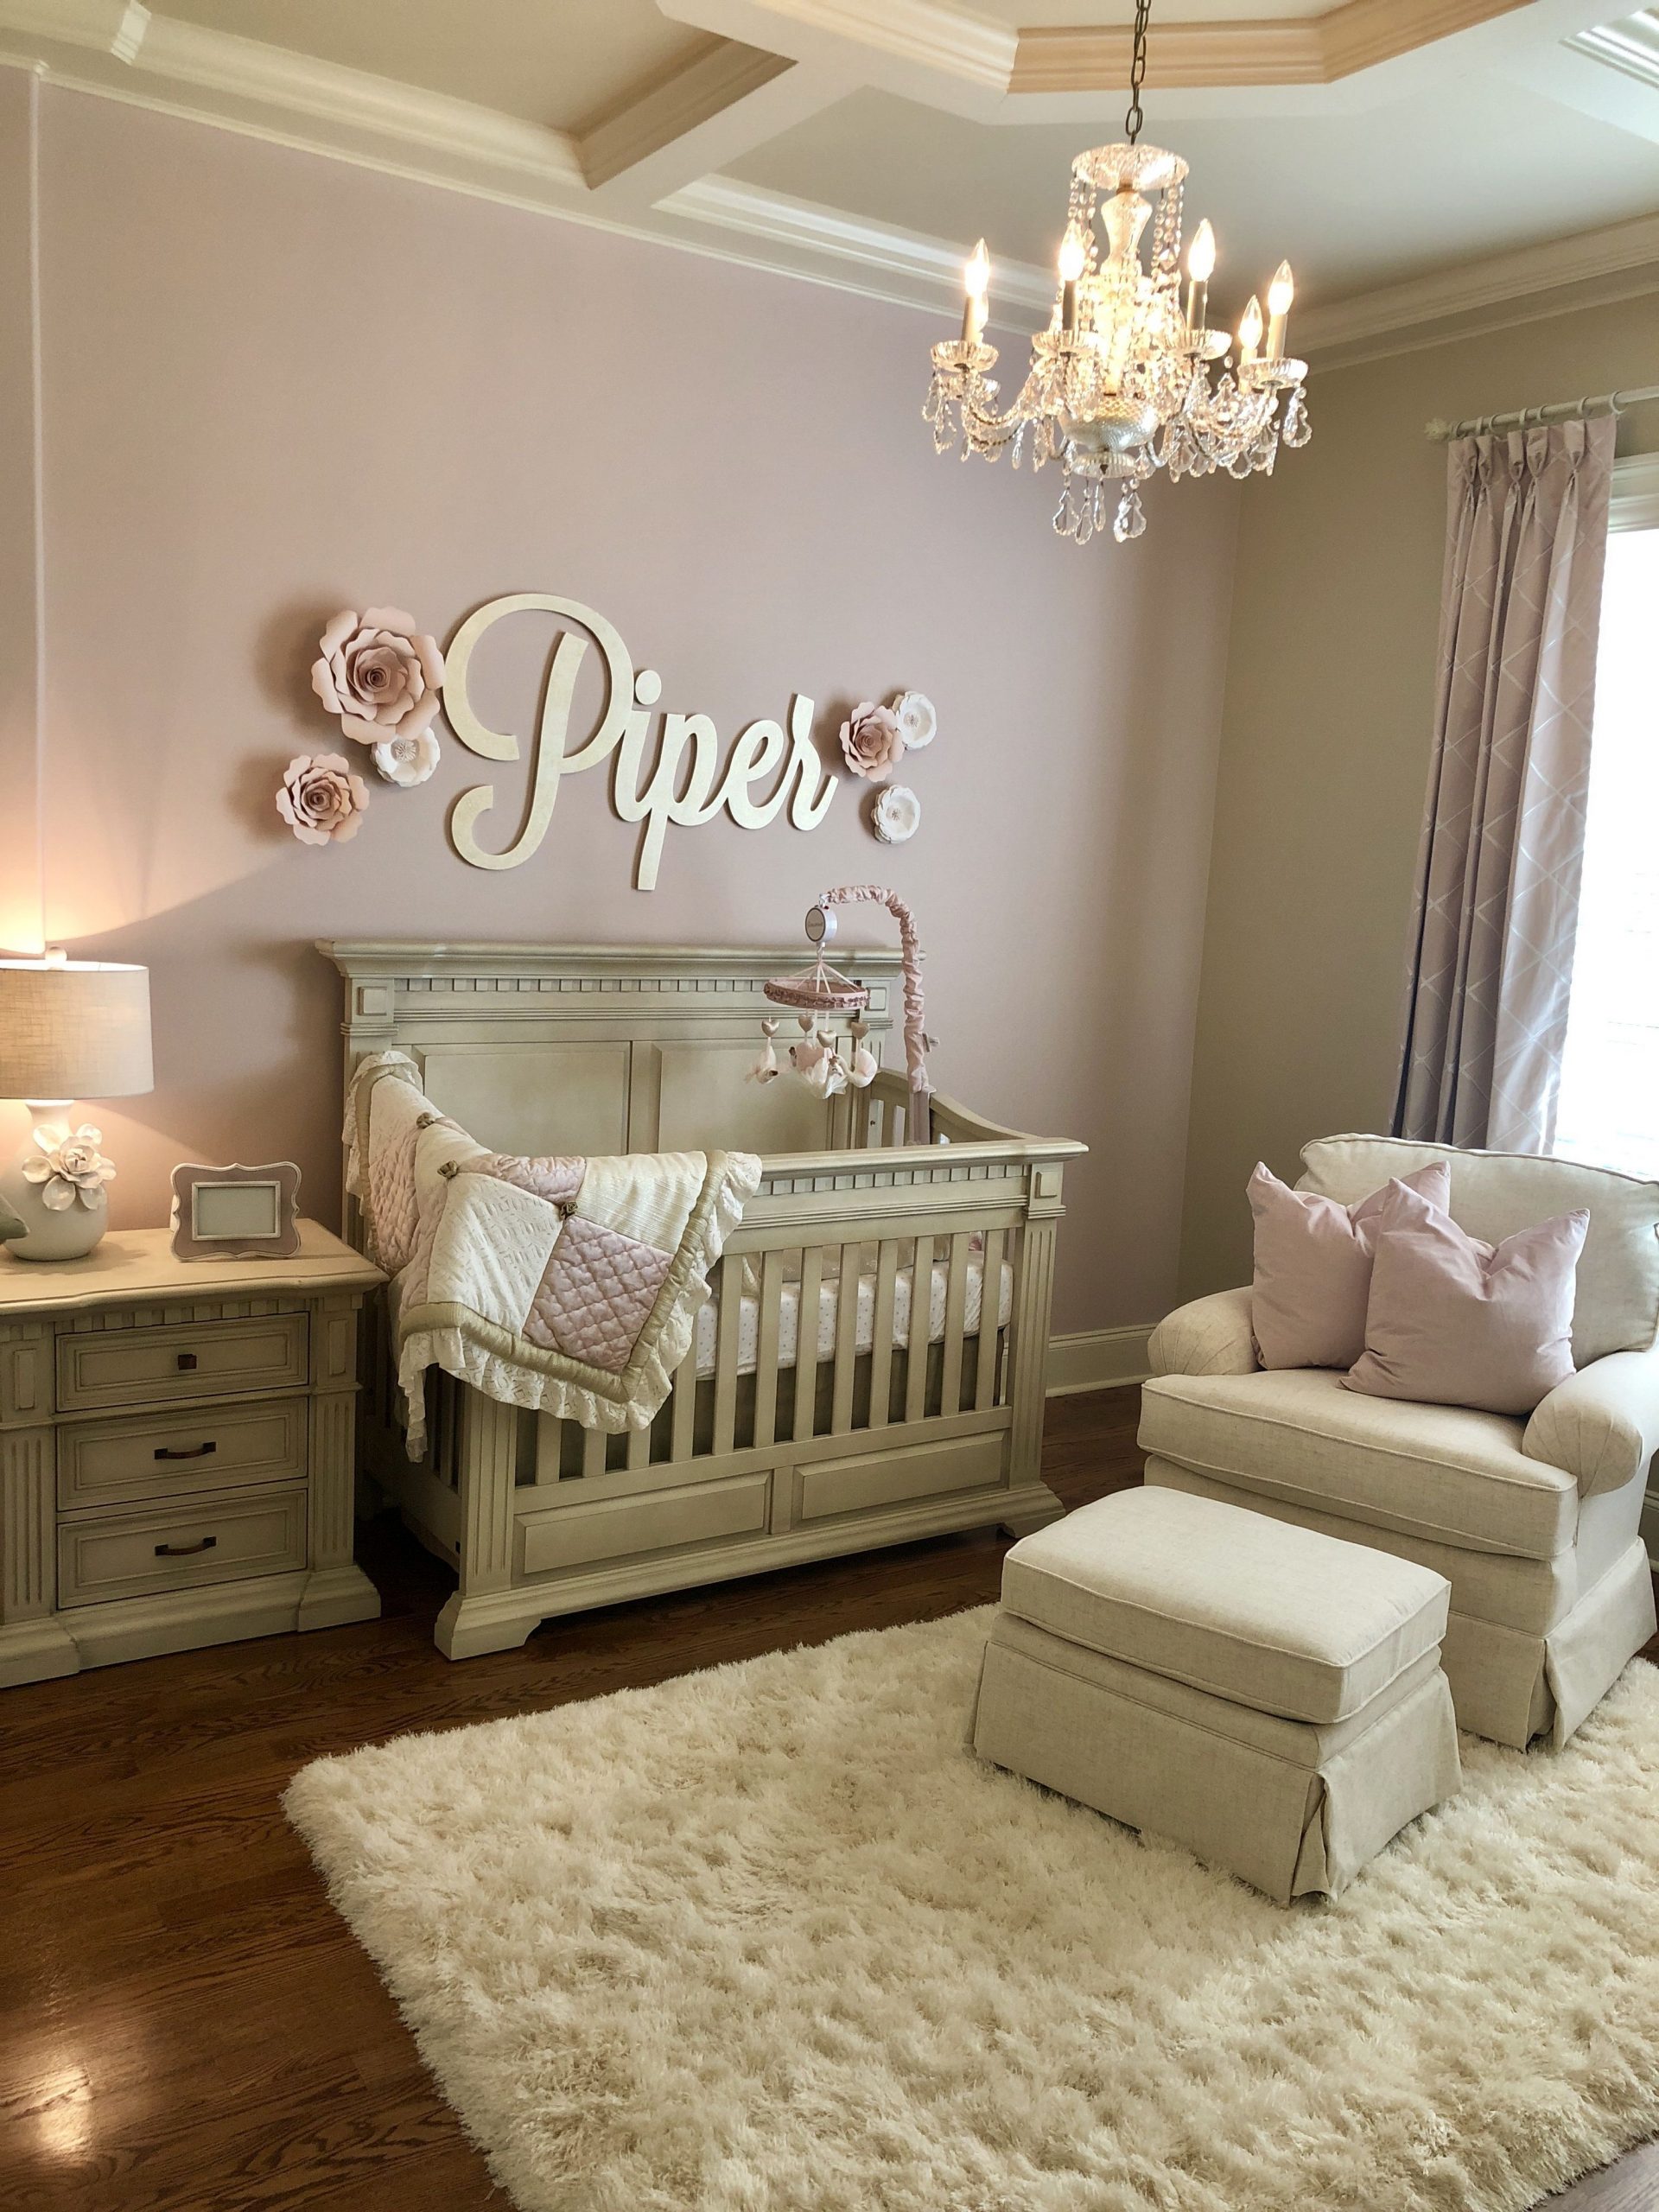 50 Inspiring Nursery Ideas for Your Baby Girl – Cute Designs You’ll Love